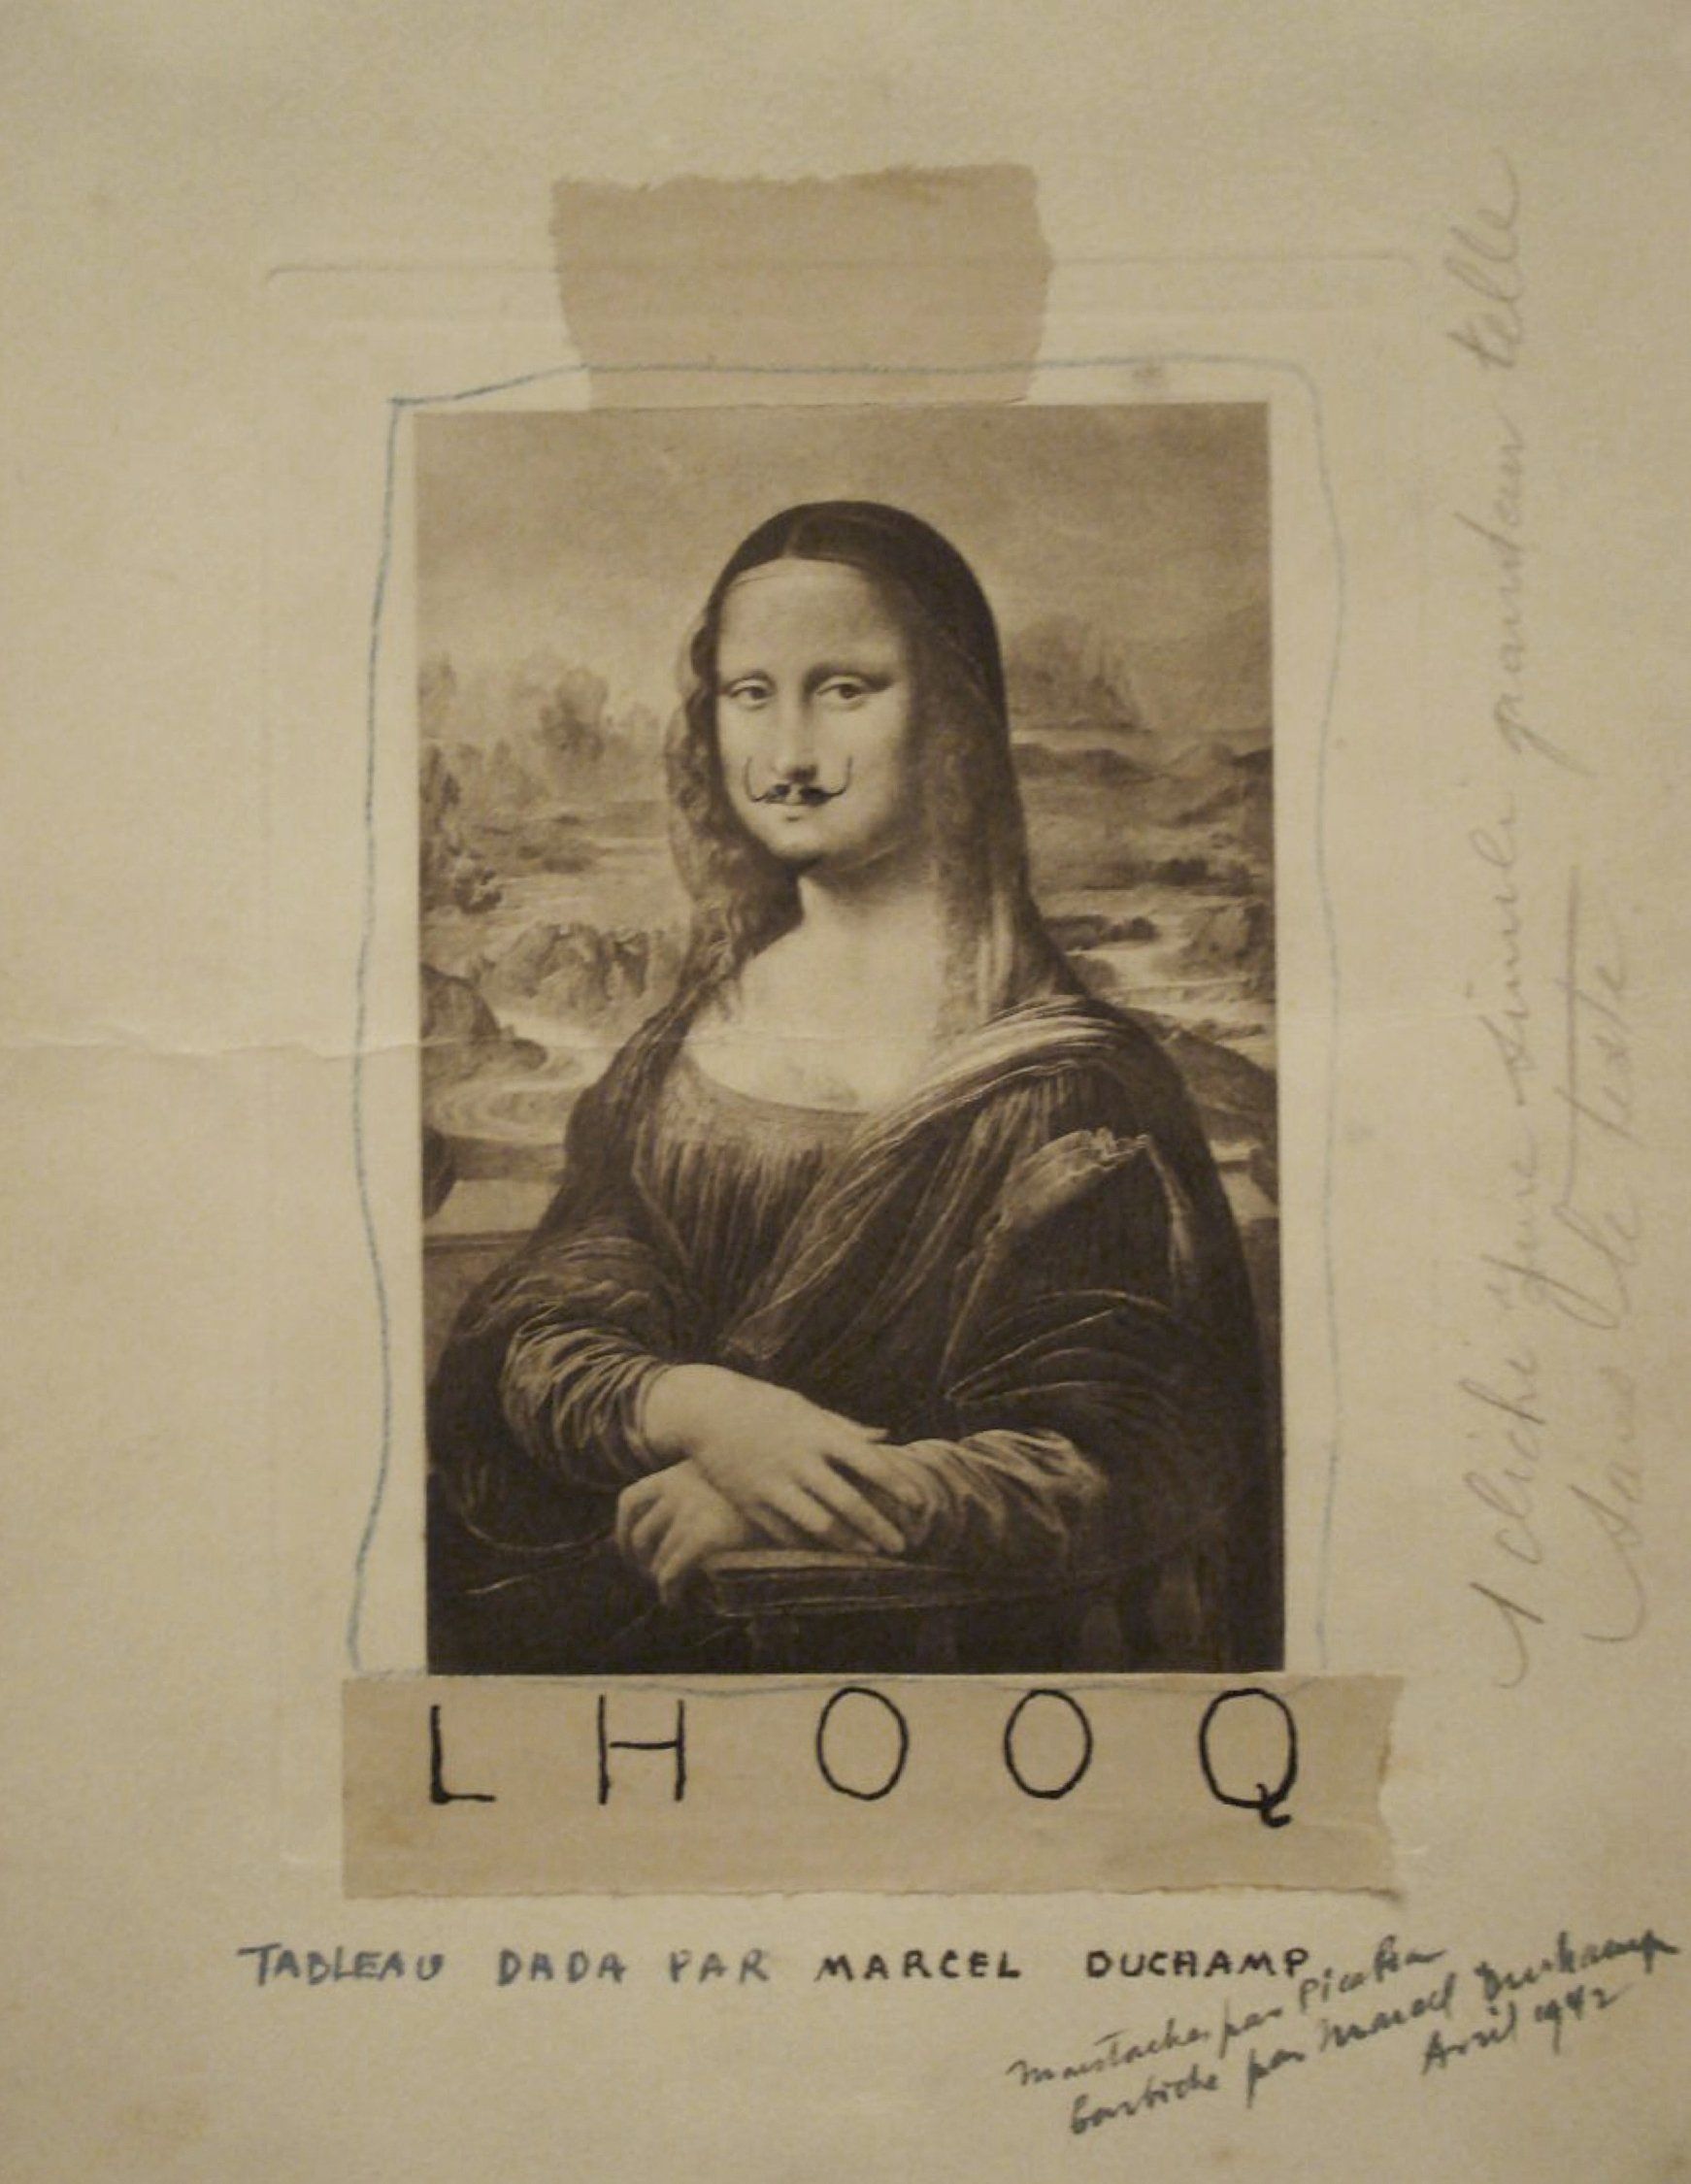 Marcel Duchamp’s 1919 Dadaist ready-made collage,  created from a cheap Mona Lisa postcard  on which Duchamp drew a mustache and a beard in pencil  and renamed the masterpiece L.H.O.O.Q. 